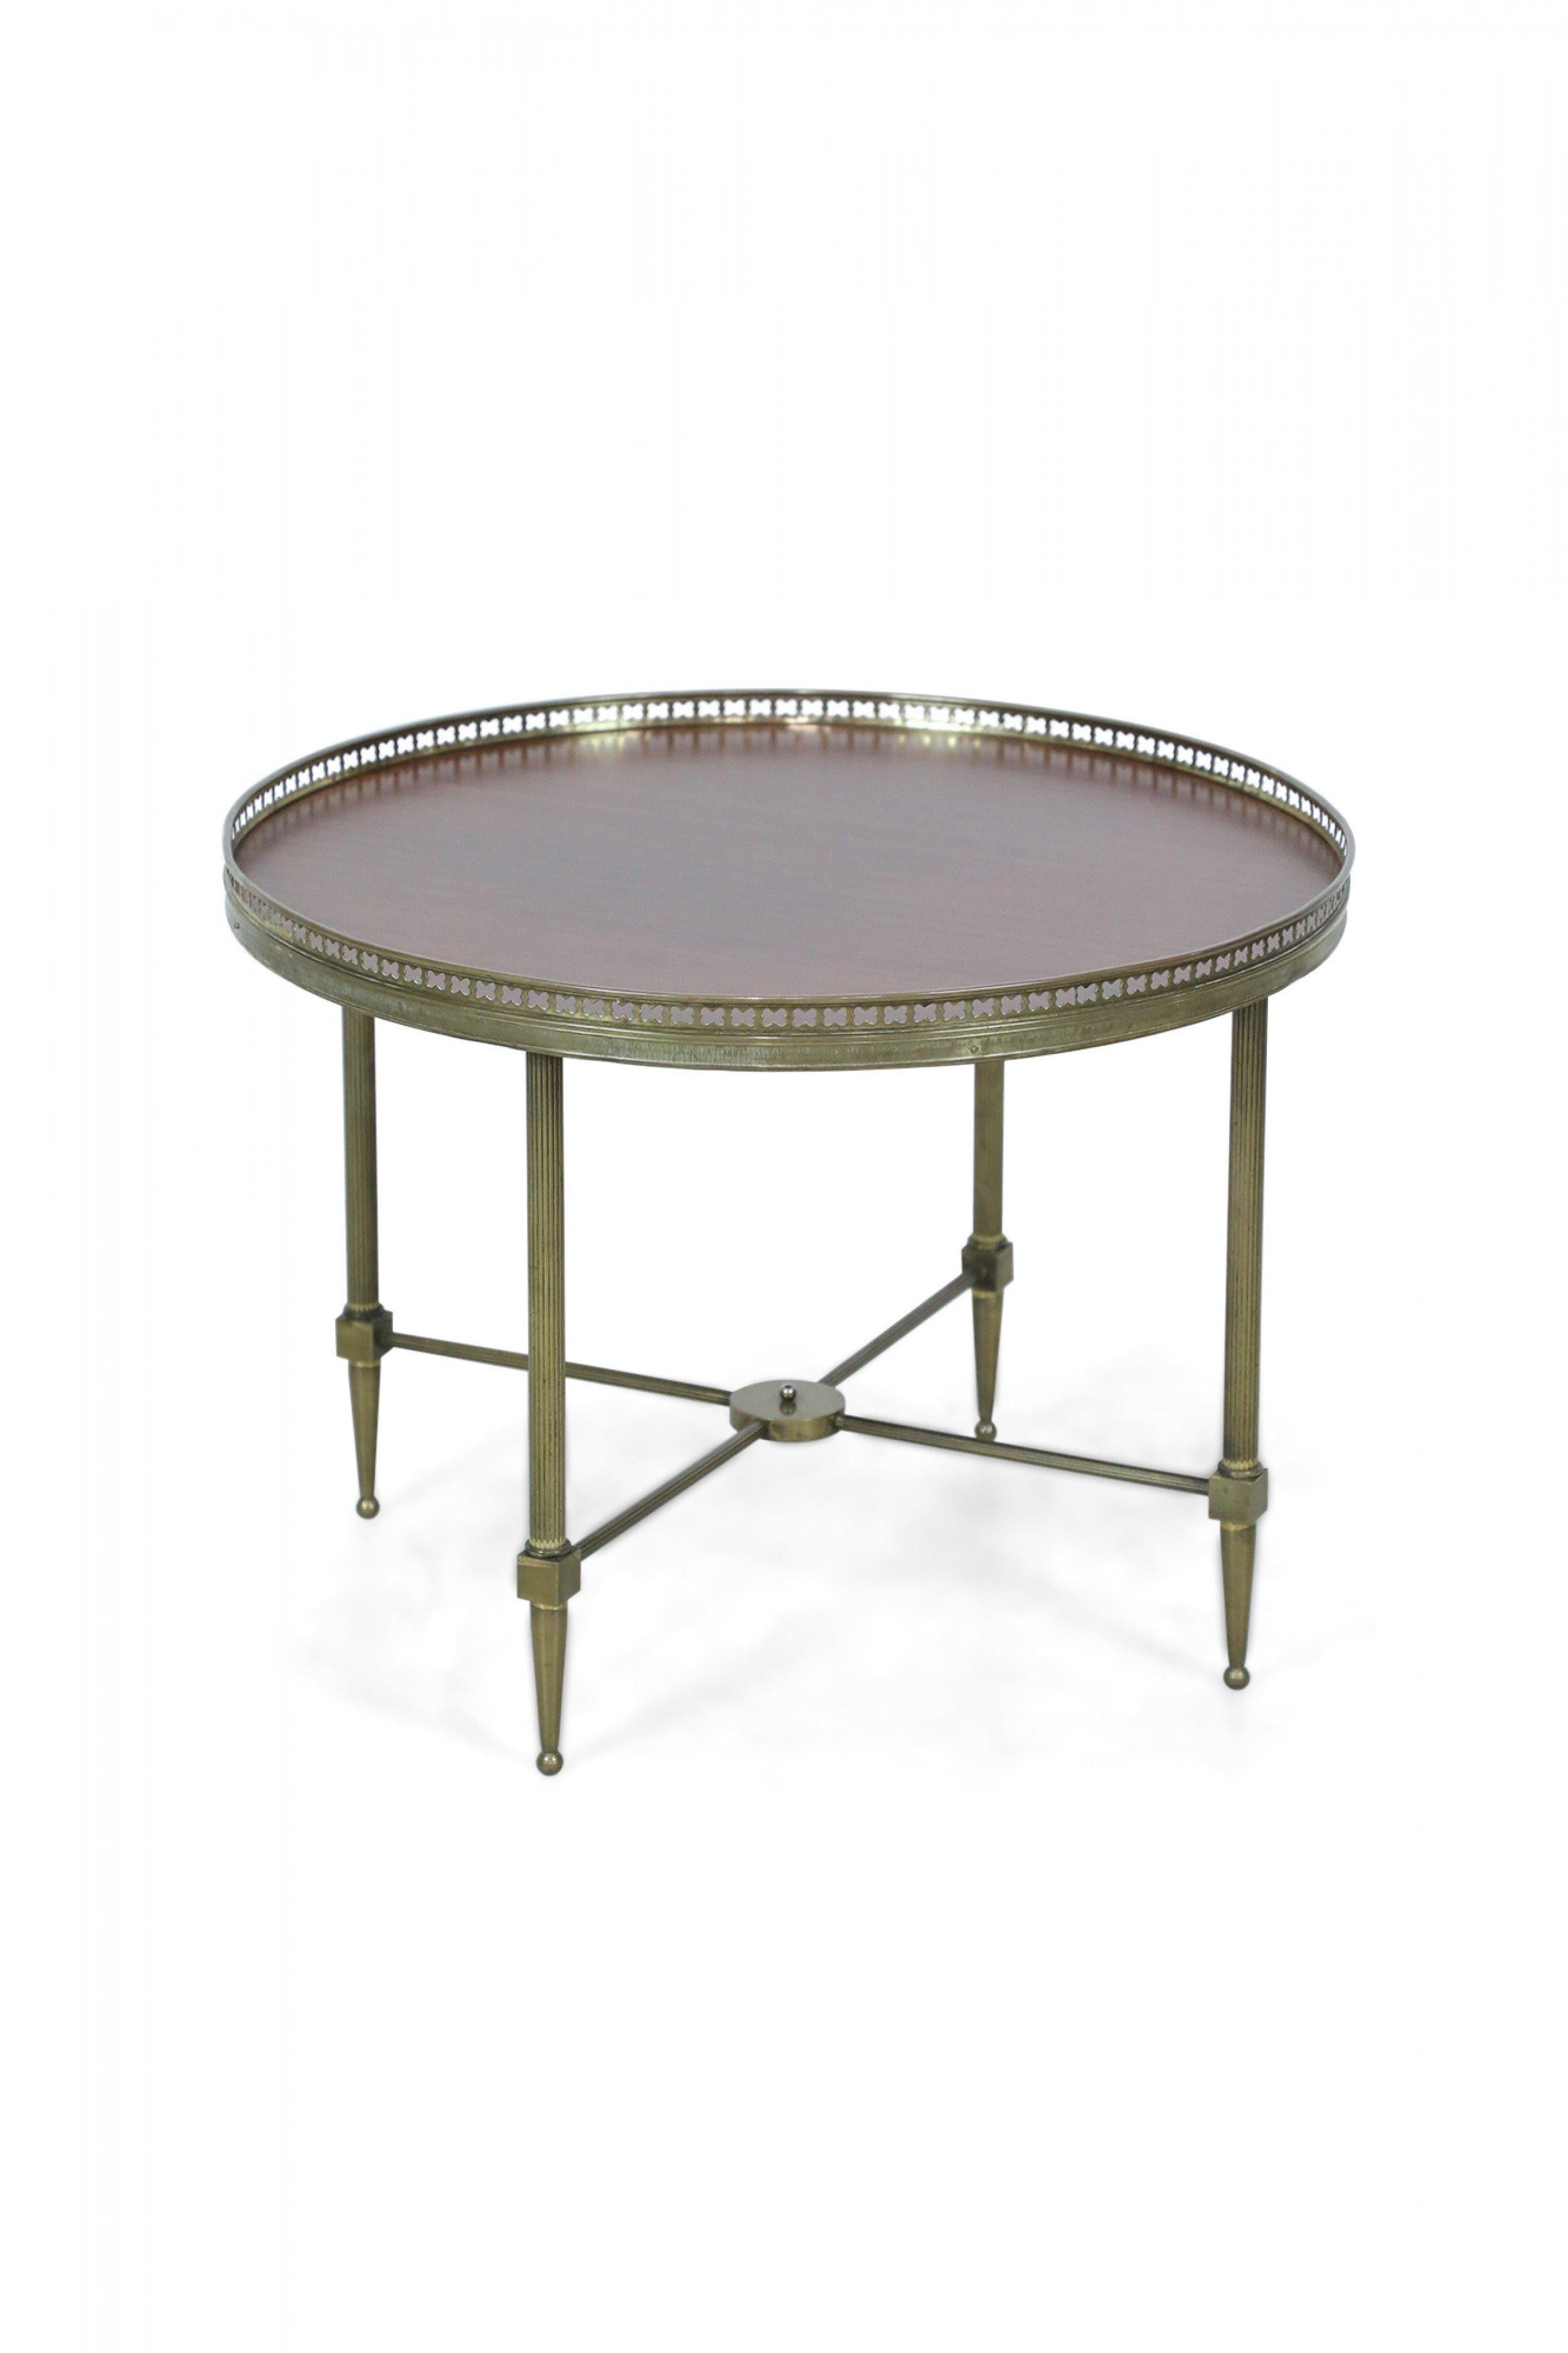 French Louis XVI-Style Brass and Mahogany Circular Side Table / Gueridon 1